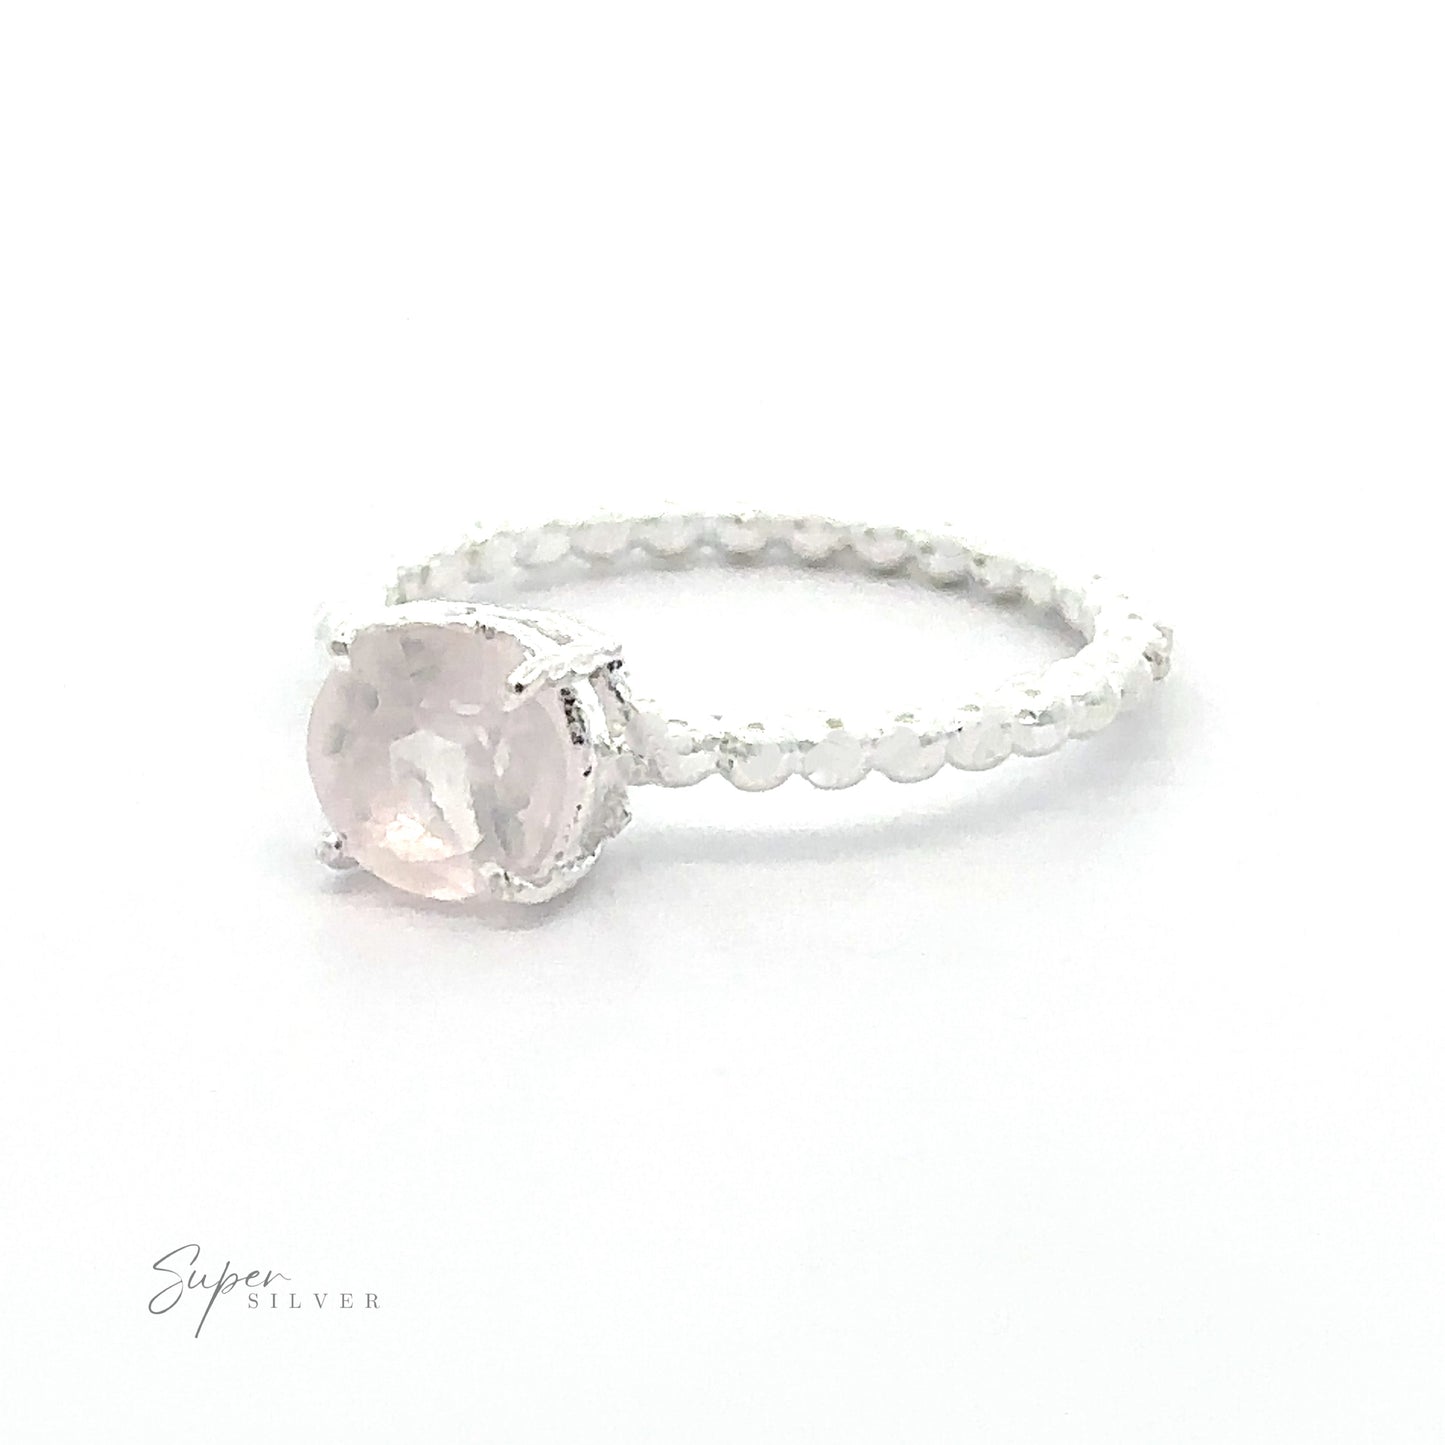 
                  
                    Stunning Circular Gemstone Ring with a vibrant pink gemstone and decorative silver band, against a white background.
                  
                